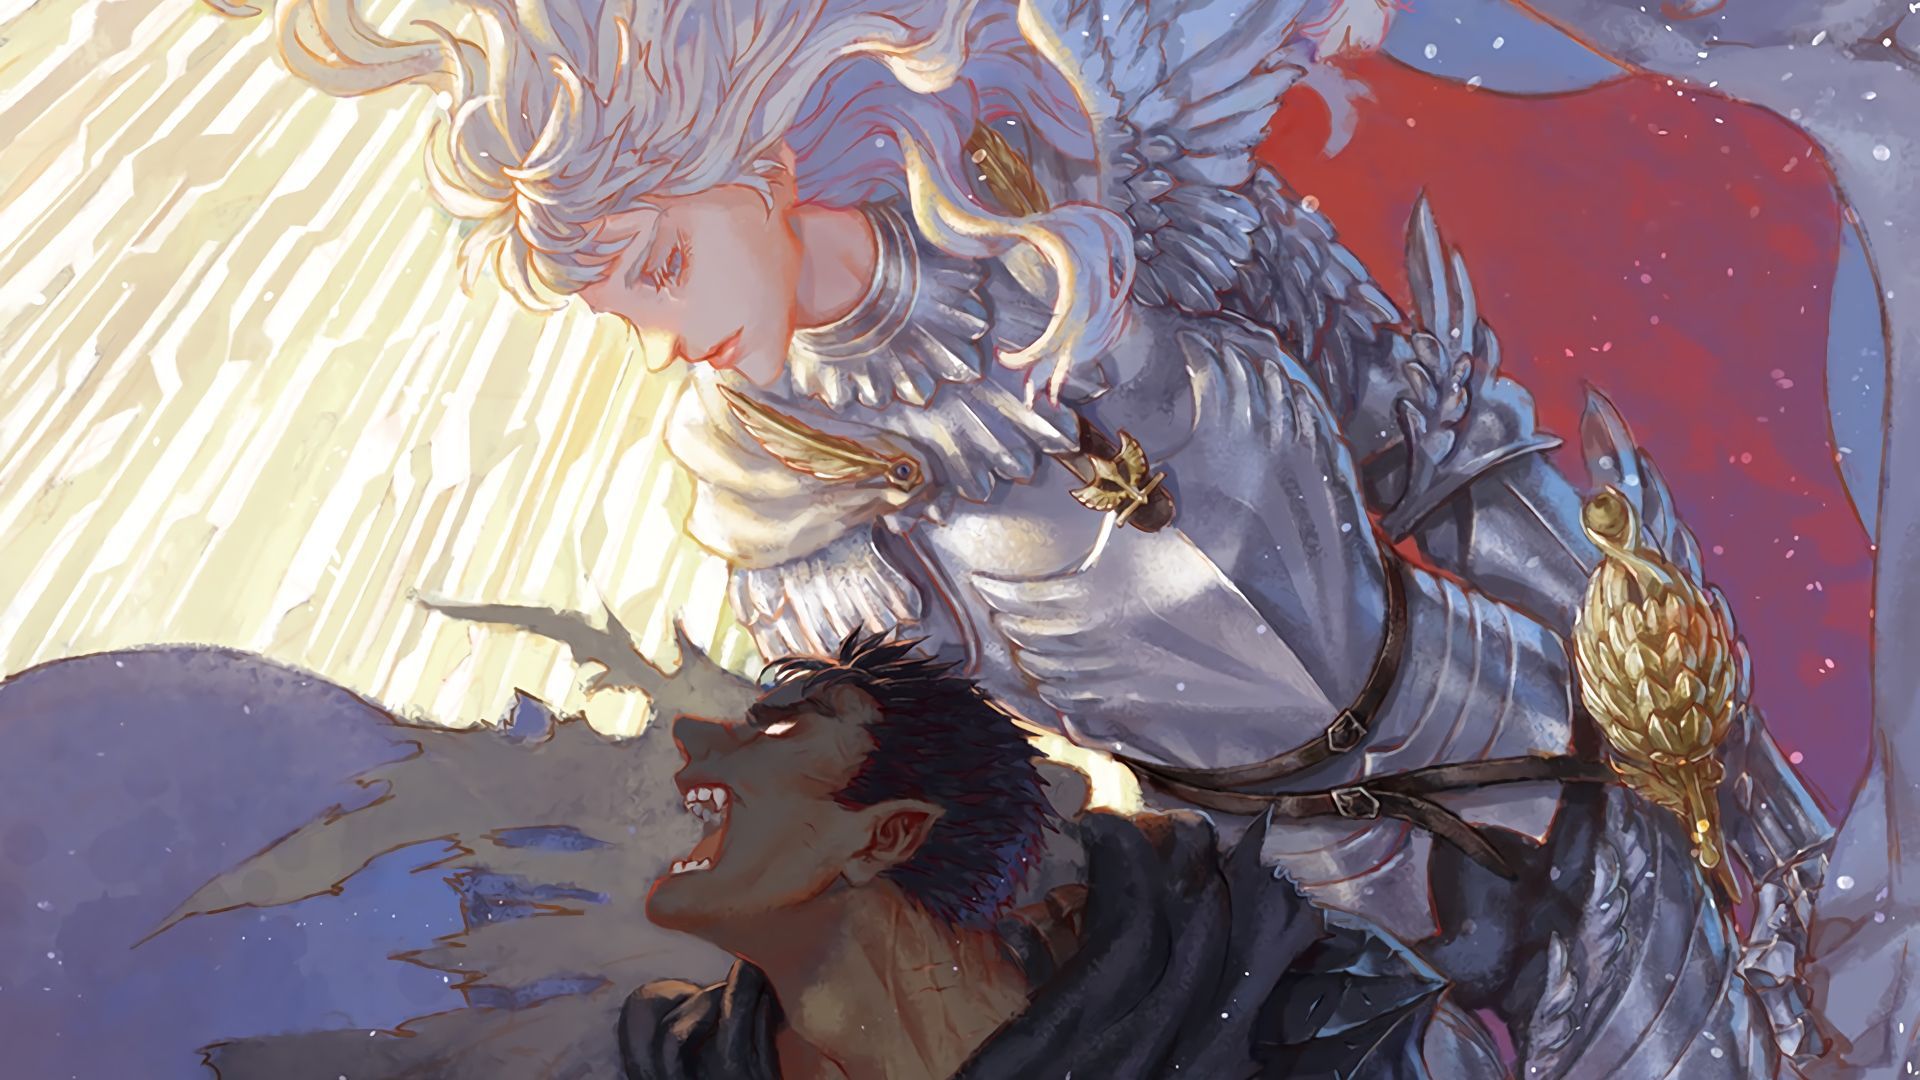 Guts and Griffith Berserk Anime